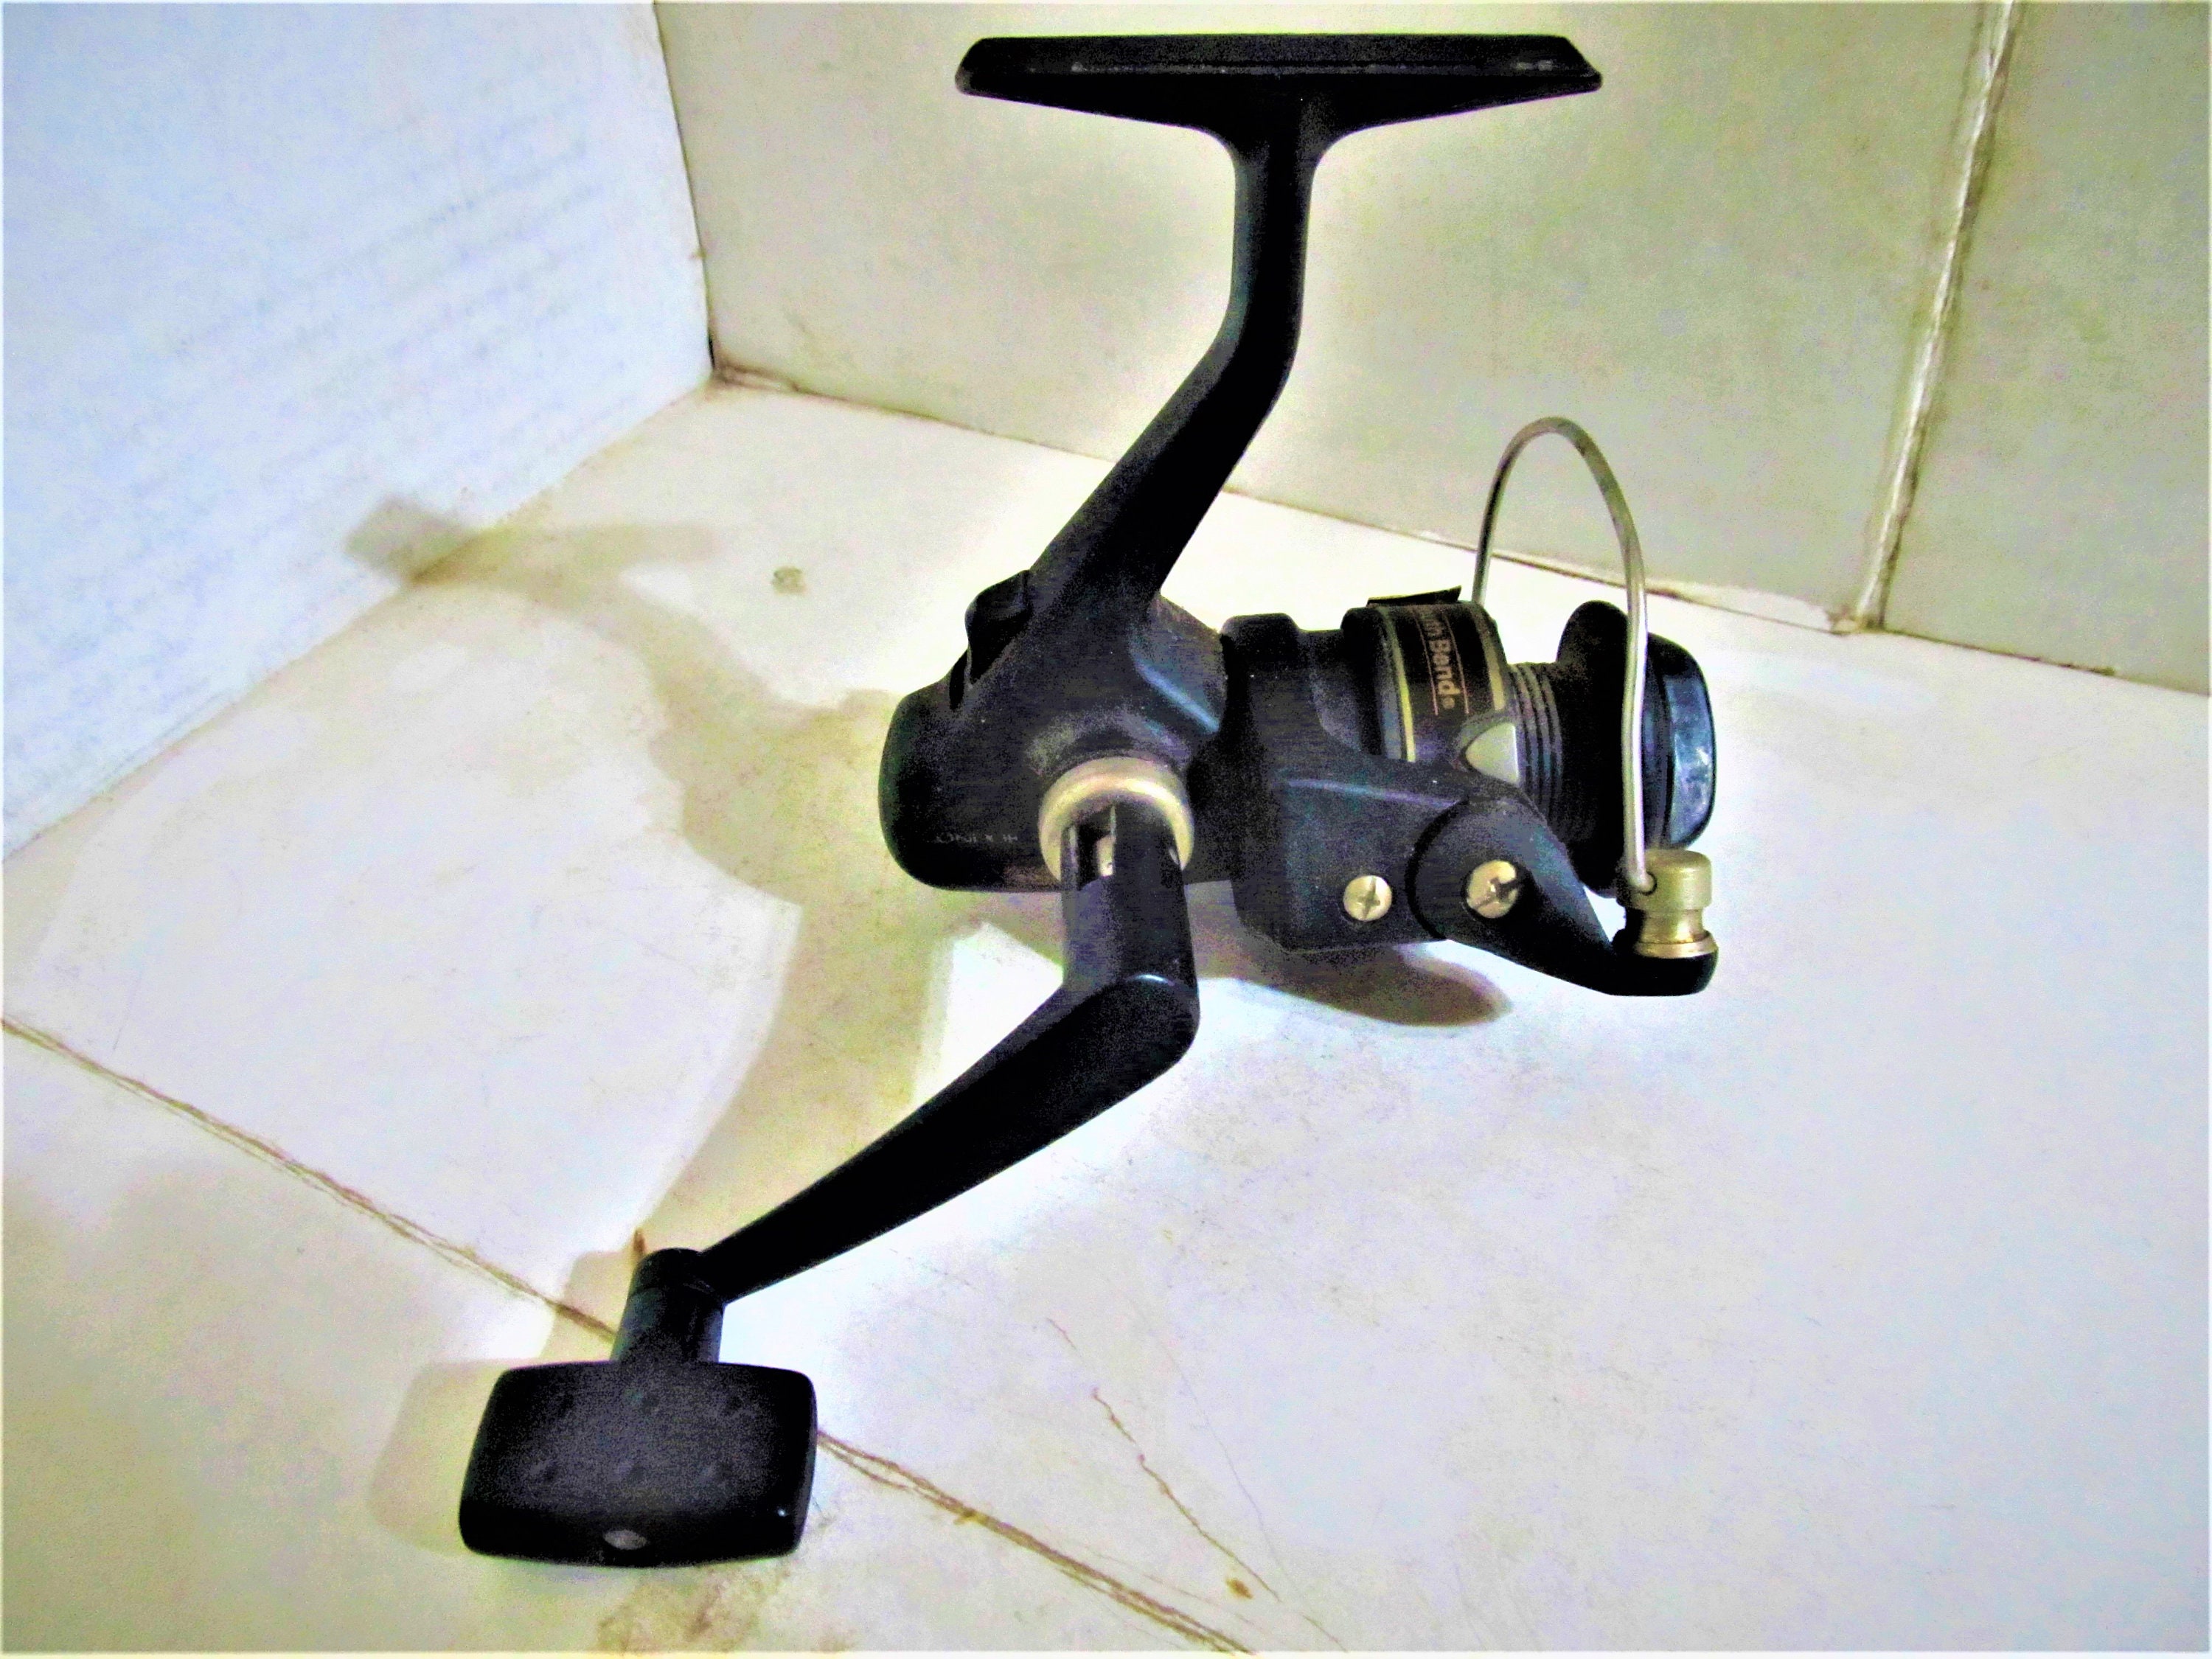 South Bend Condor 510a Ultra Lite Spinning Reel -  Israel